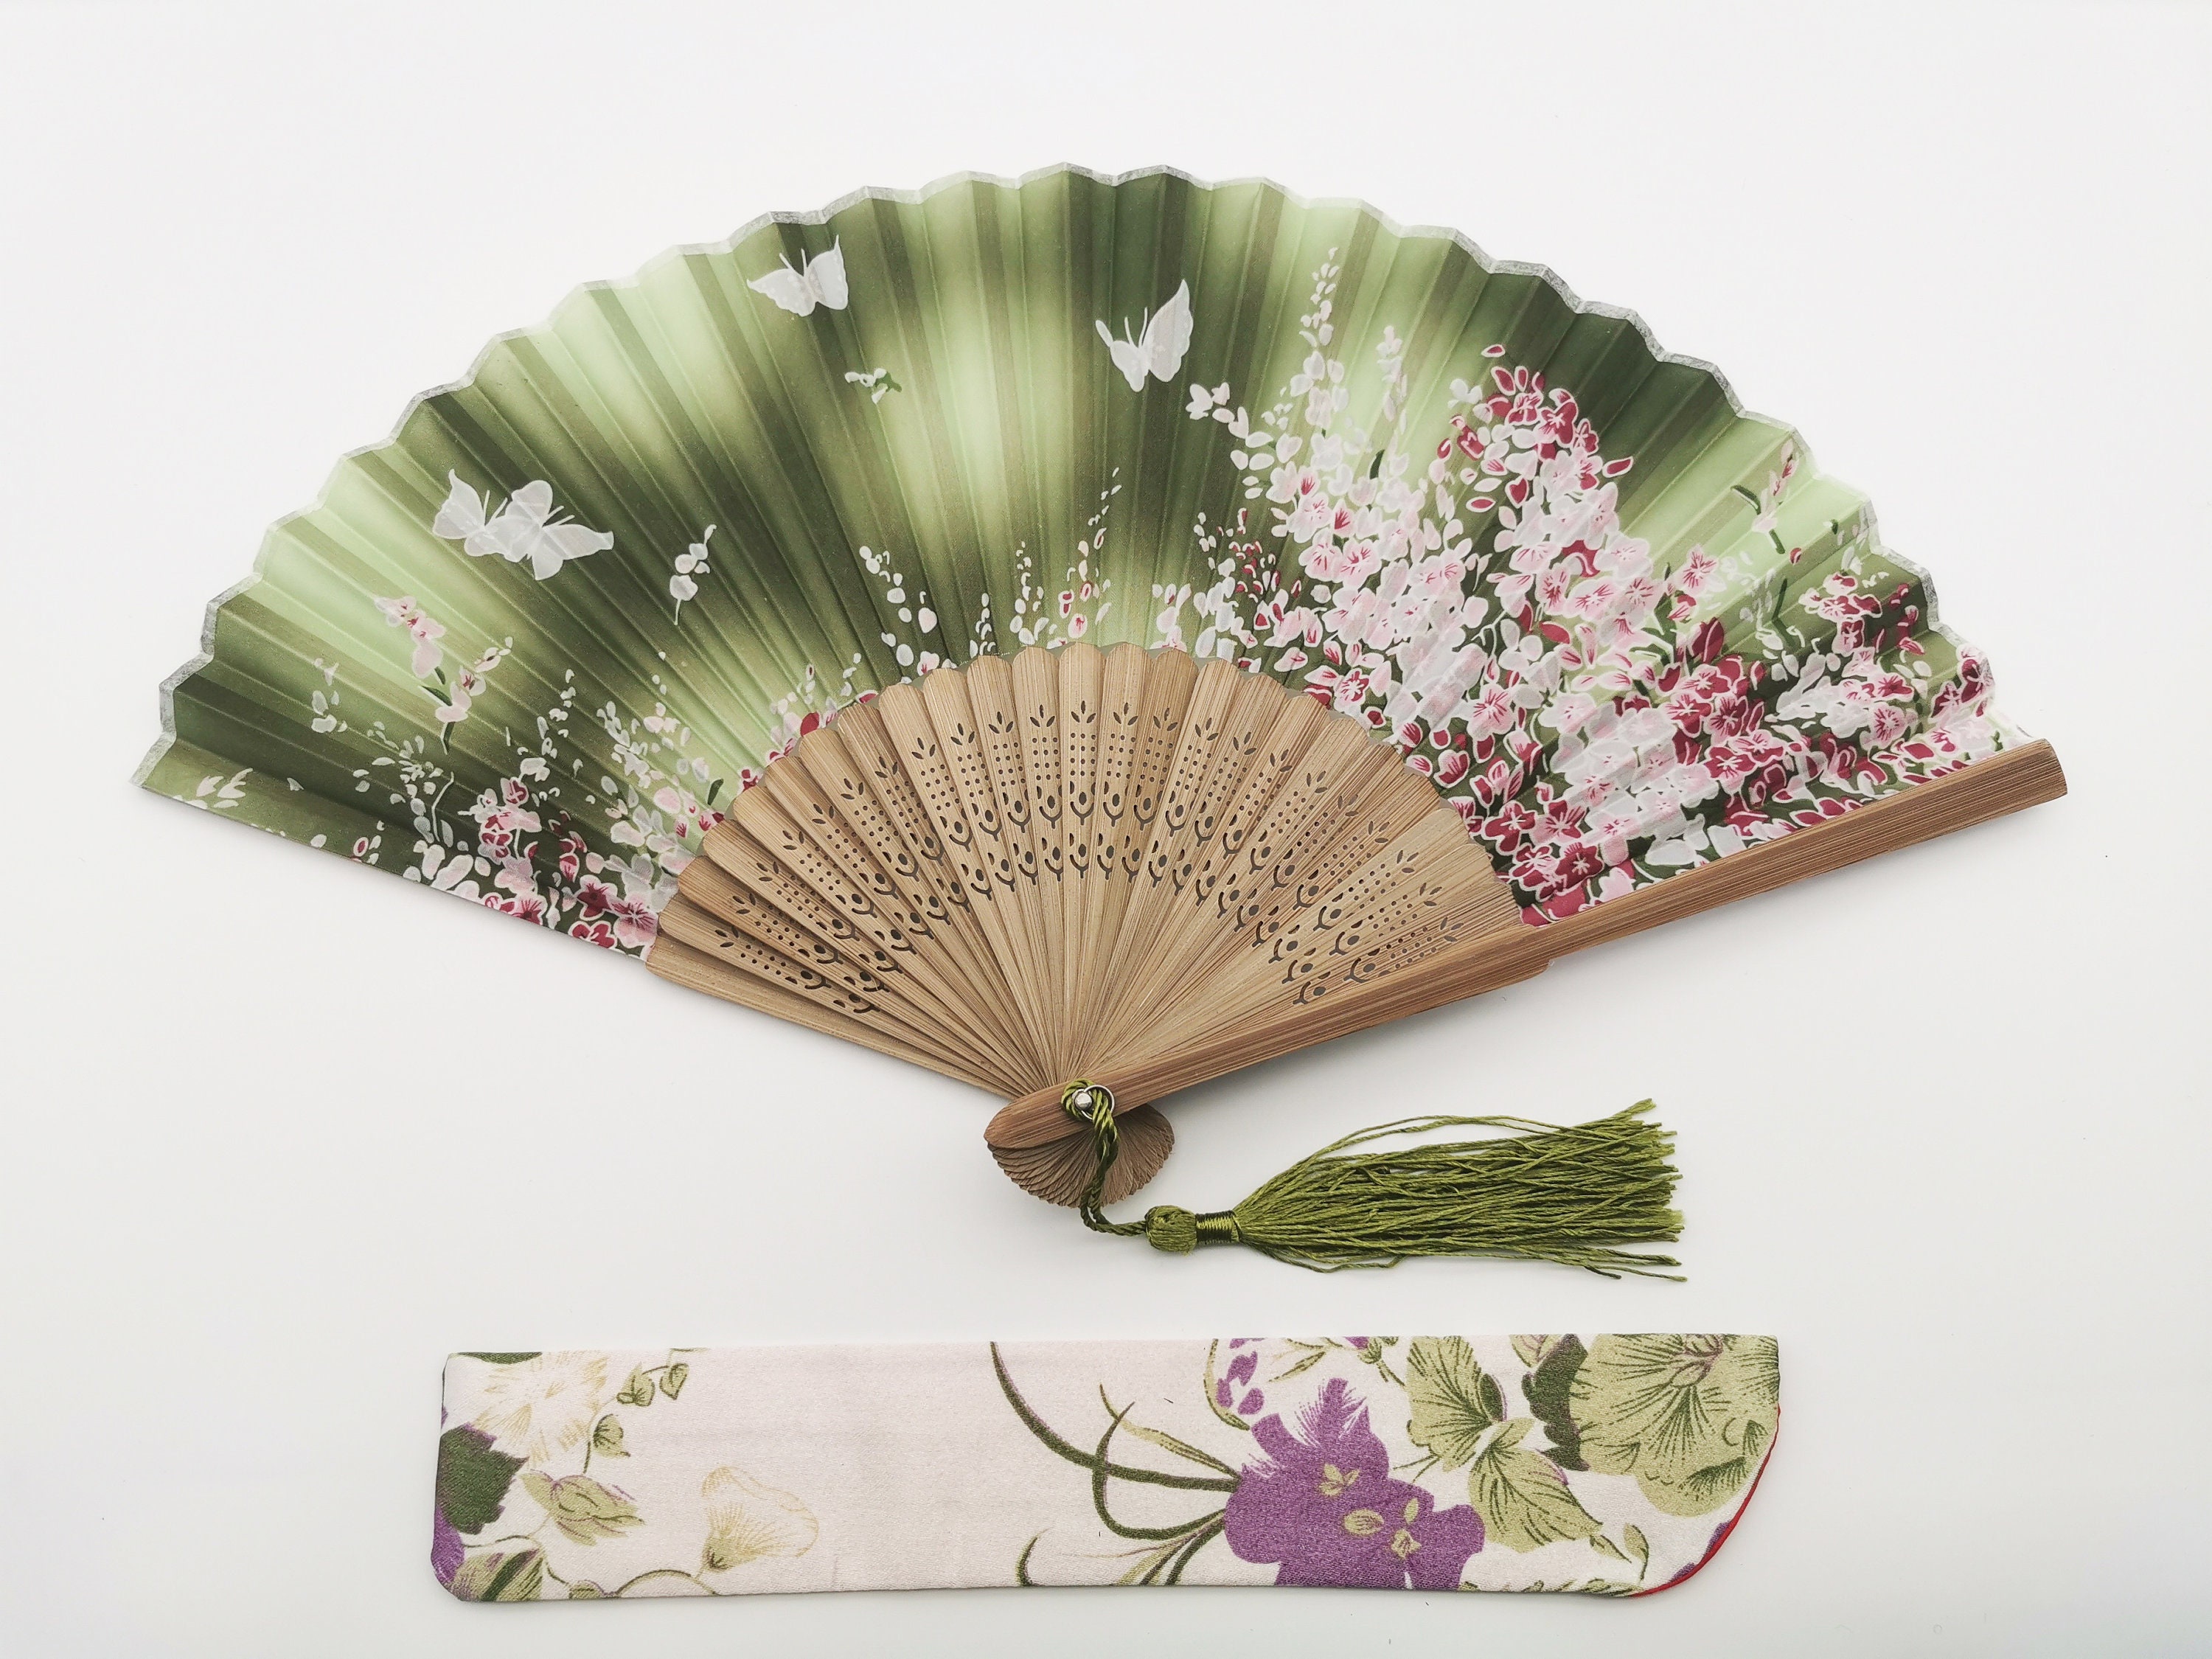 Hot Japanese hand-held Fan Wooden Scented Wedding Party Gift LE P*FH 